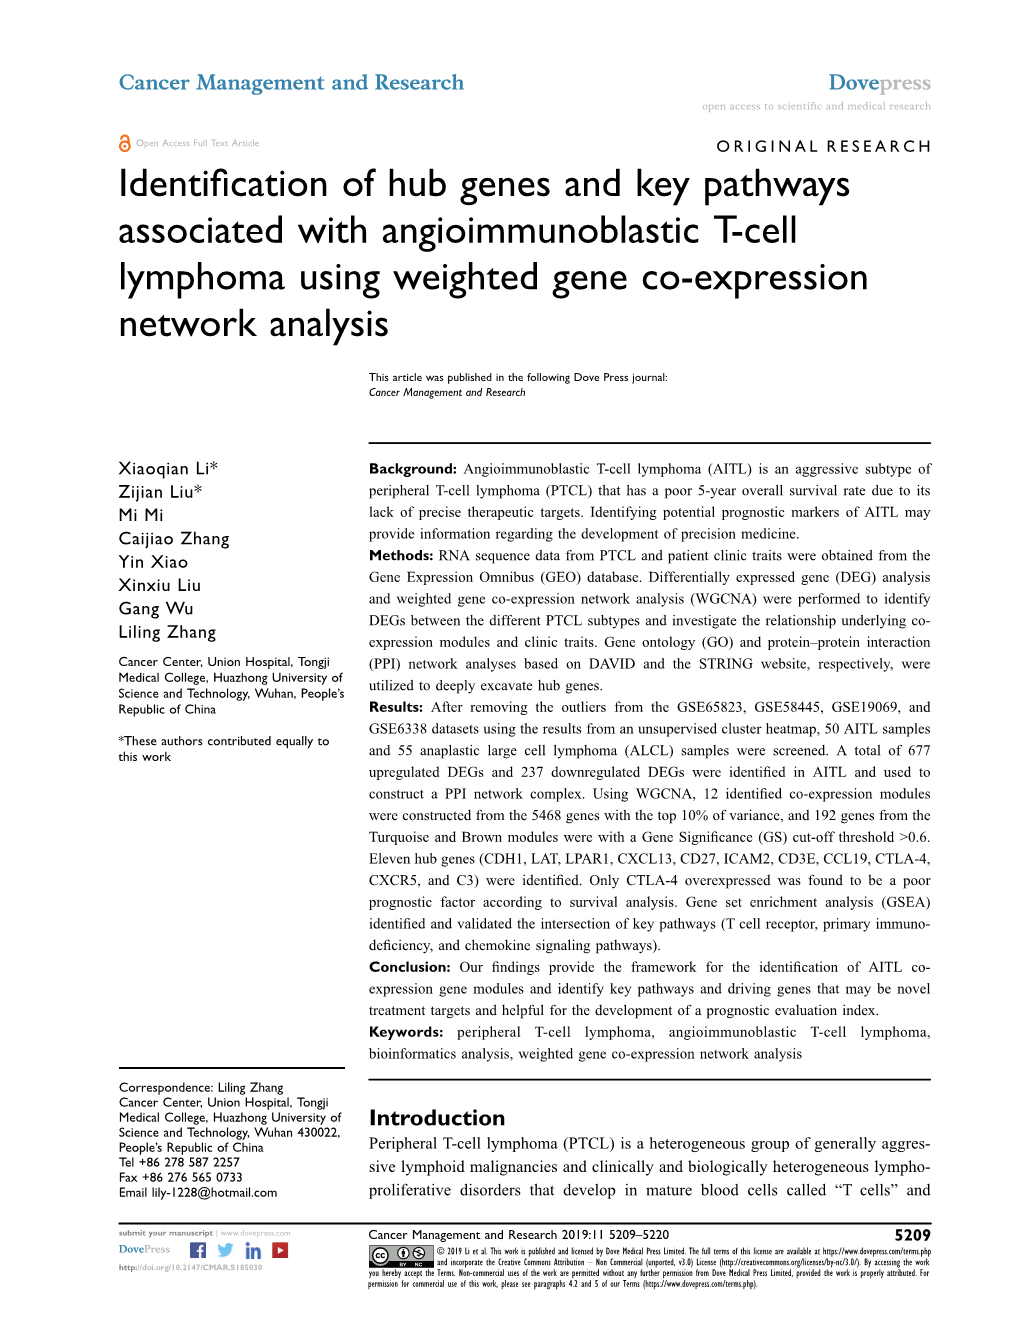 Identification of Hub Genes and Key Pathways Associated With